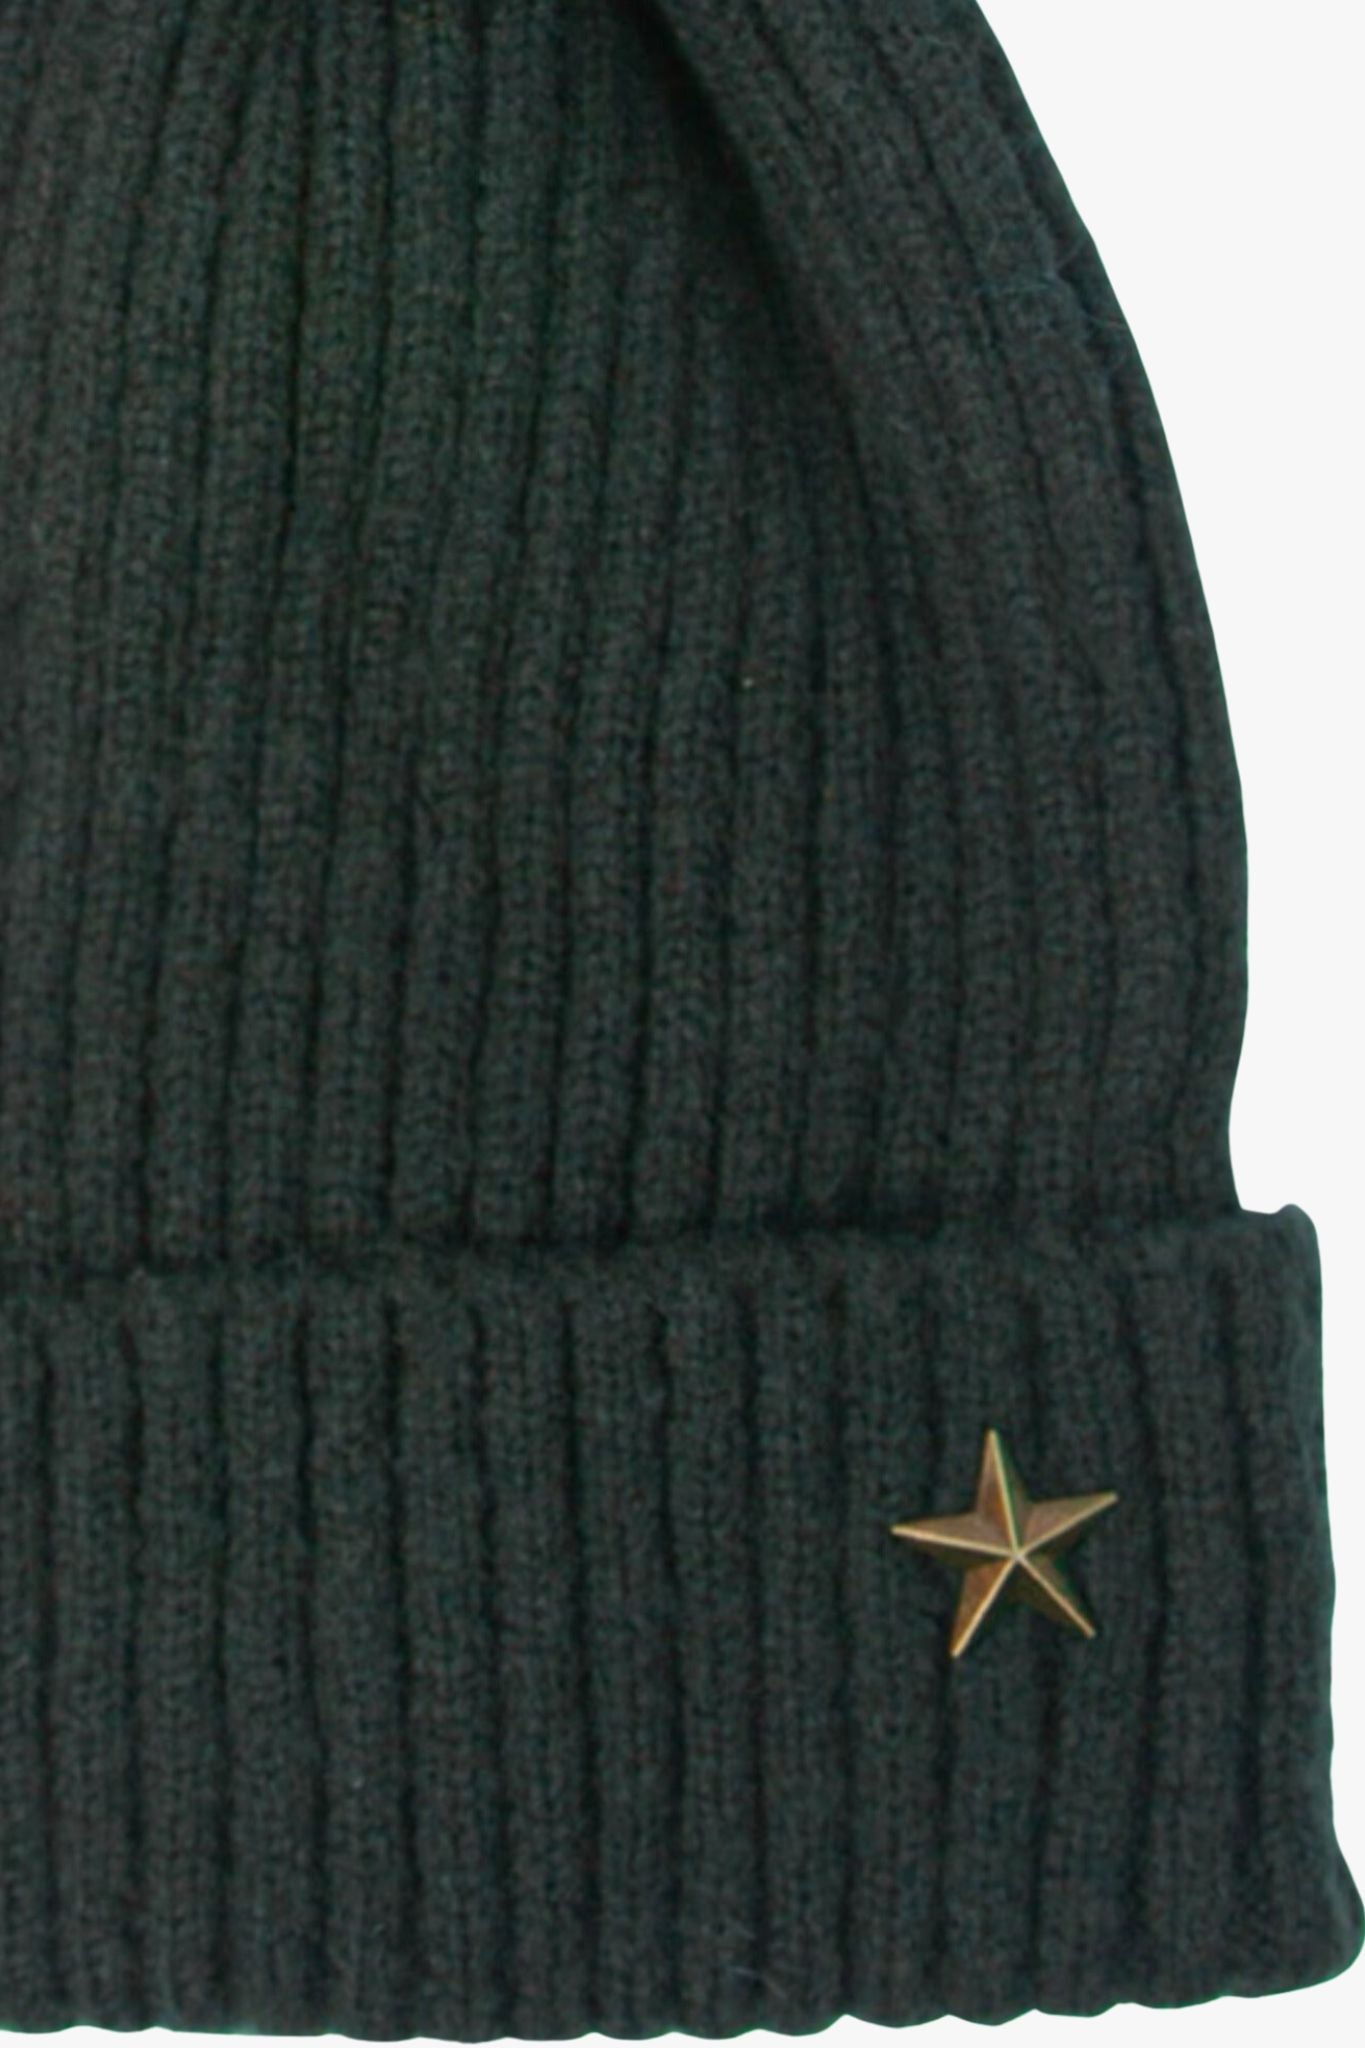 close up of the gold star and the ribbed knit pattern